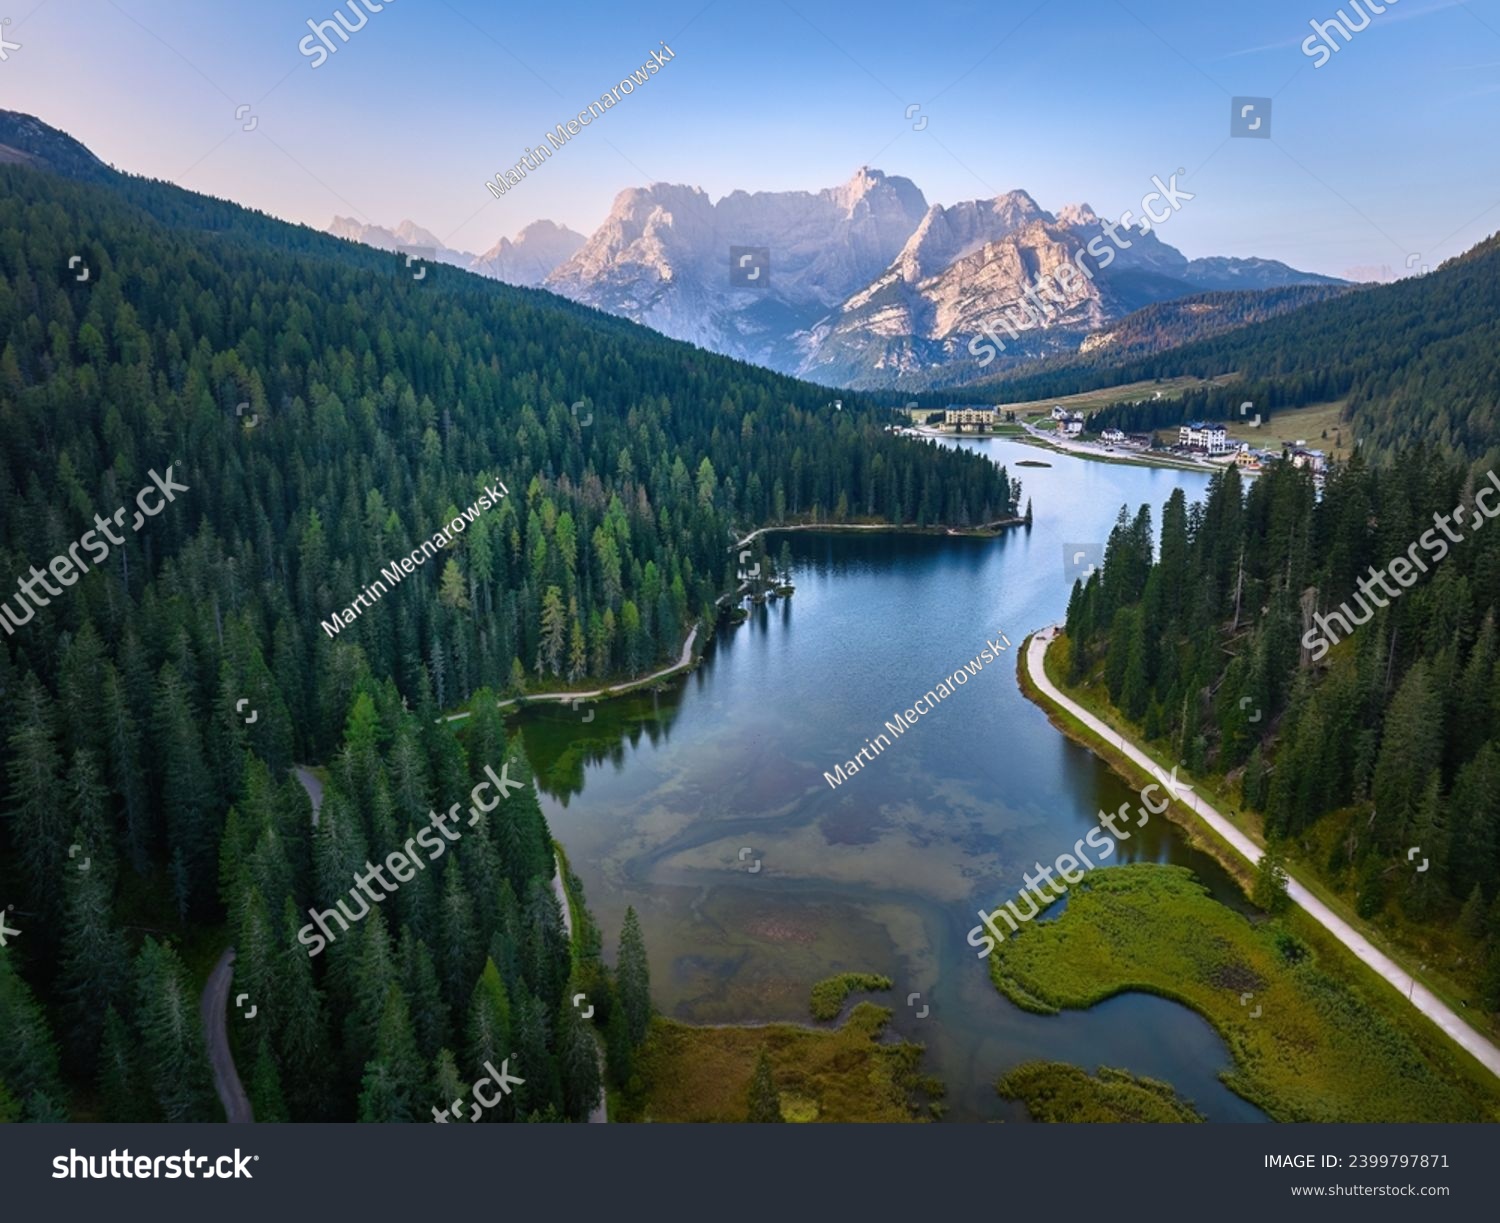 Aerial view of Lago di Misurina  and the panorama of the Dolomites in background. Sunny morning, blue sky, view across the lake and hiking paths.  #2399797871